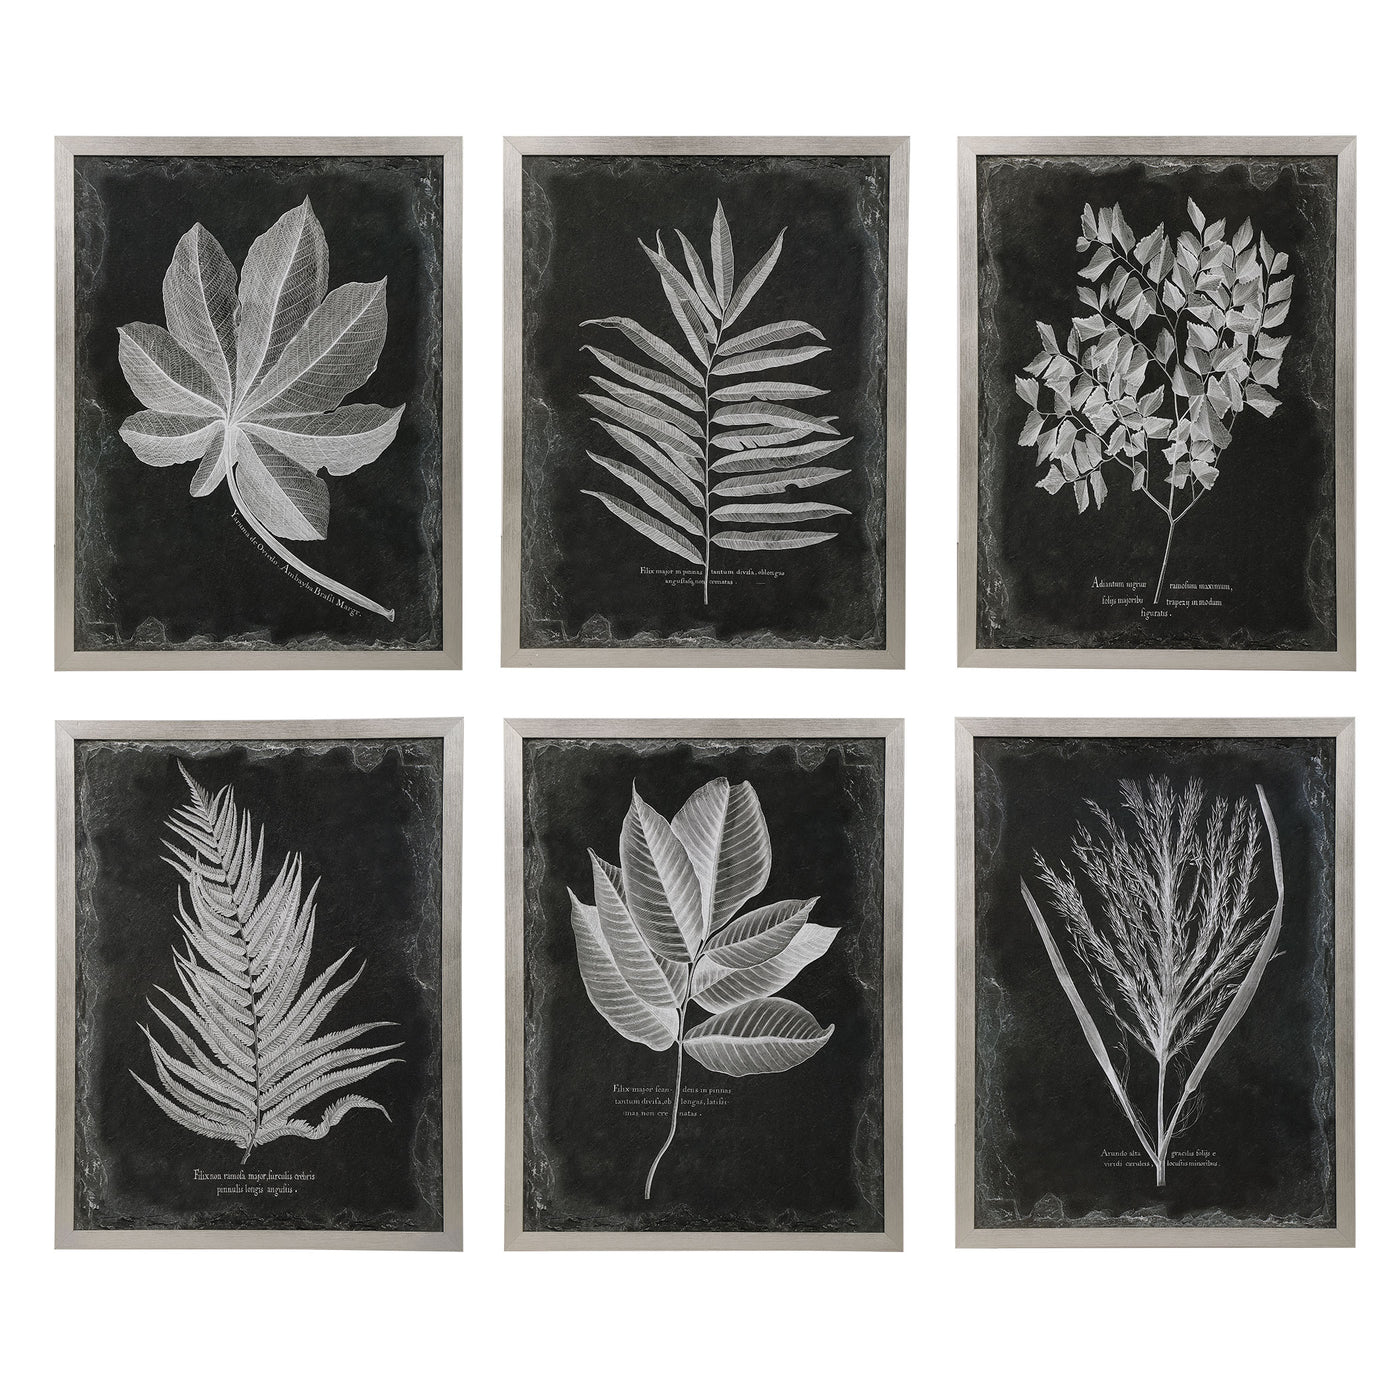 This Botanical Artwork Showcases Vintage Style With A Contemporary Edge. Each Striking Black And White Contrast Is Accente...